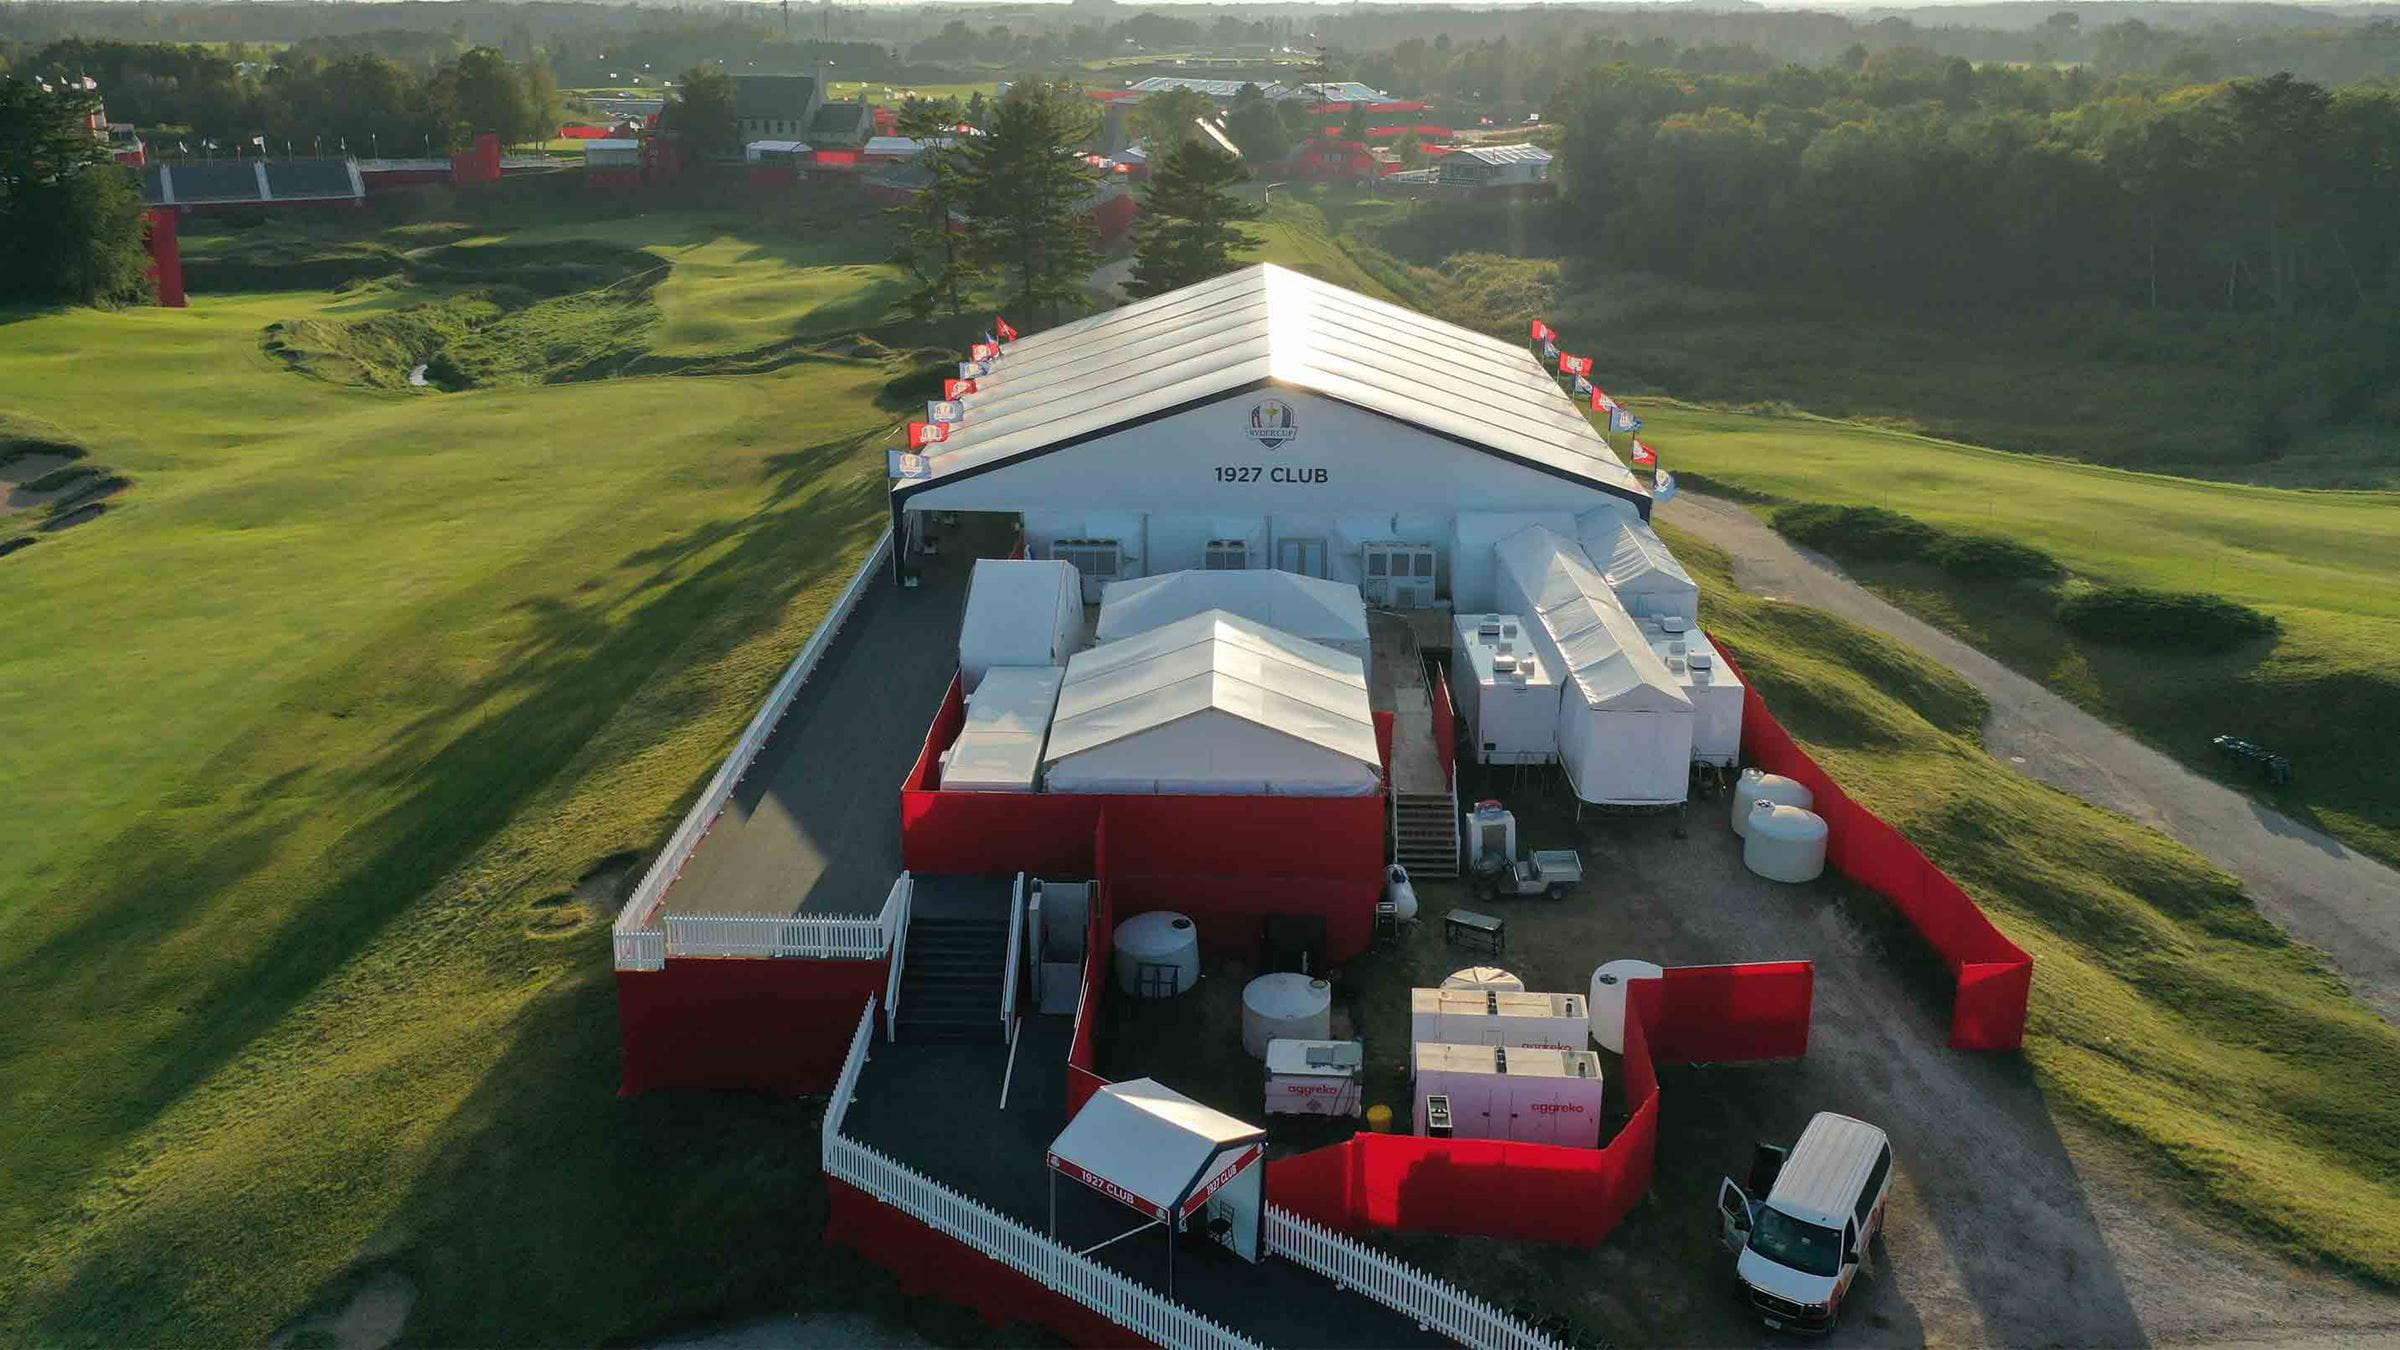  Power, heating and cooling for The Ryder Cup